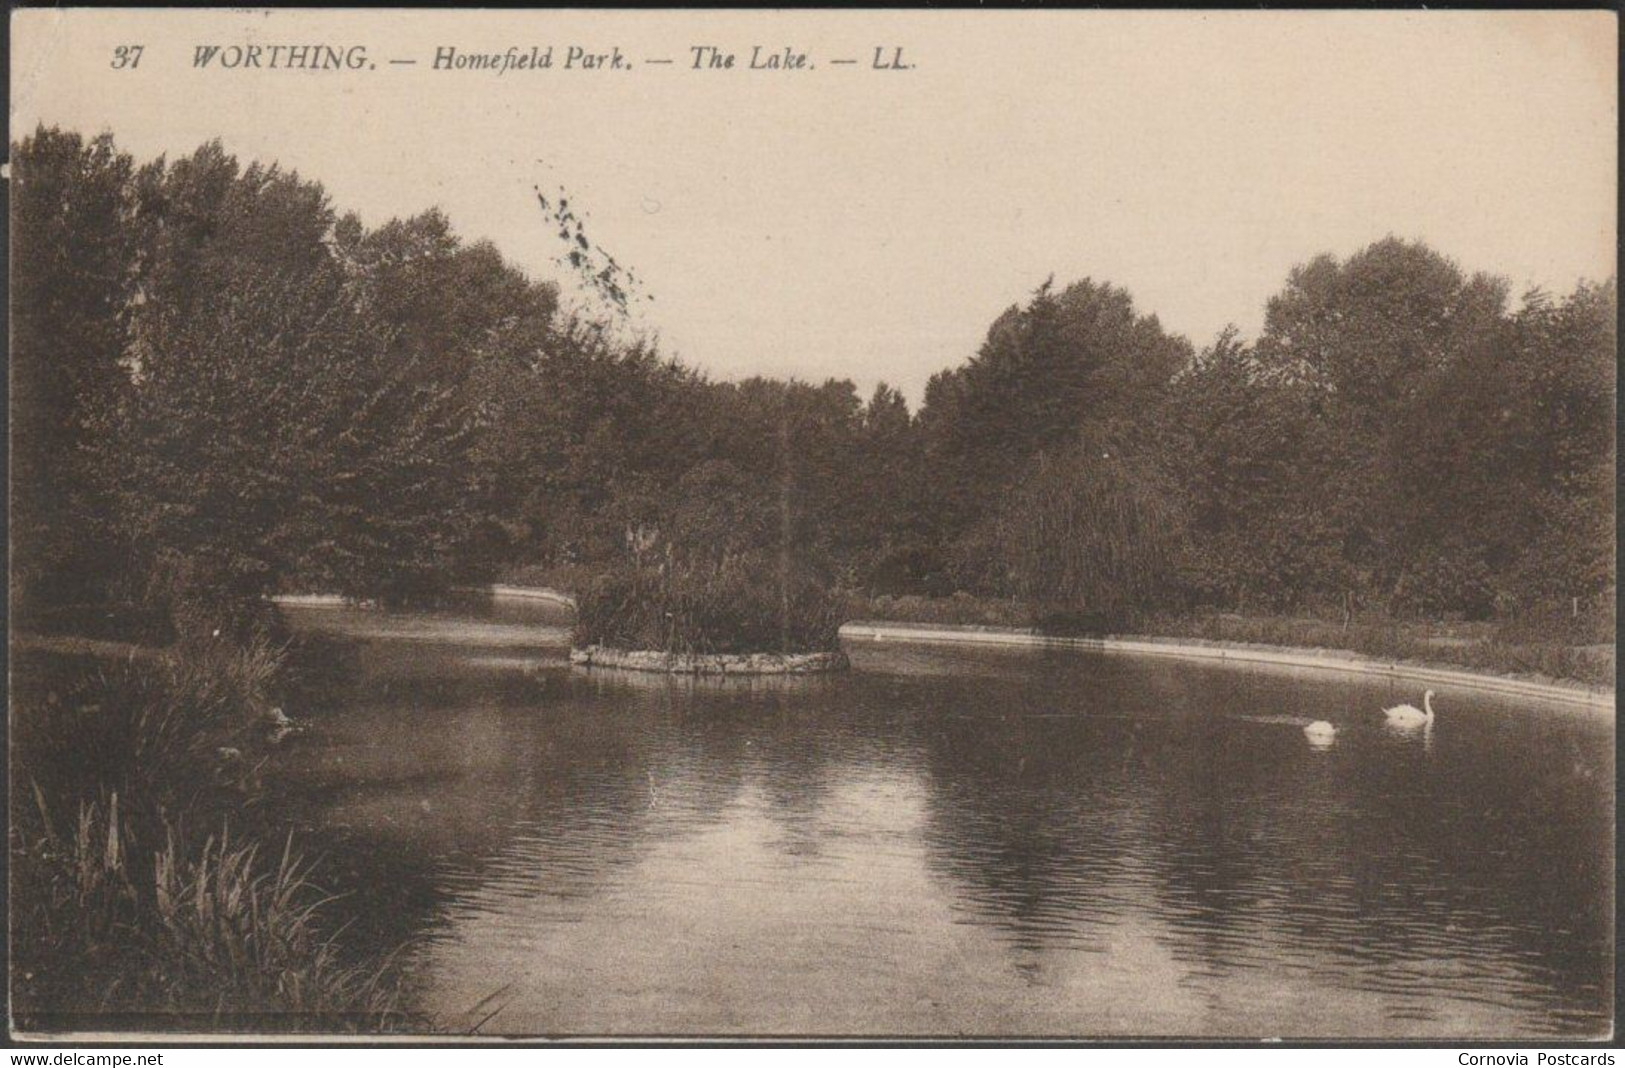 The Lake, Homefield Park, Worthing, Sussex, 1916 - Lévy Postcard LL37 - Worthing